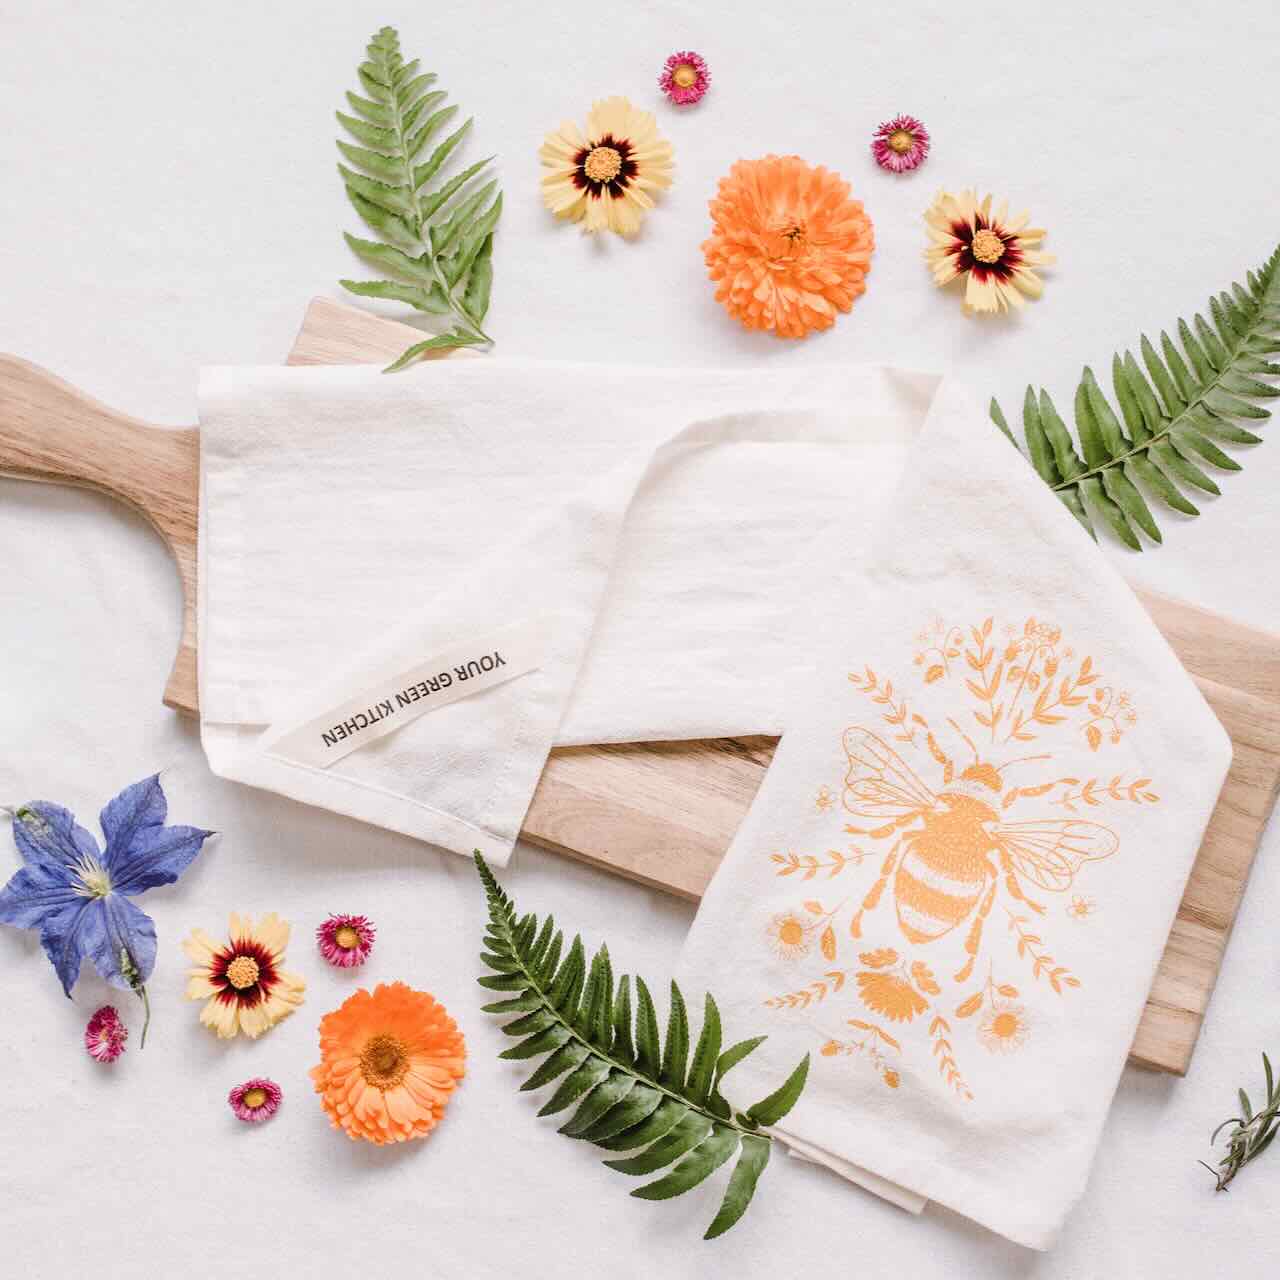 A white kitchen tea towel with a large yellow bee printed, laying casually on top of a wooden chopping board, with flower and leaves as decoration pieces around it.